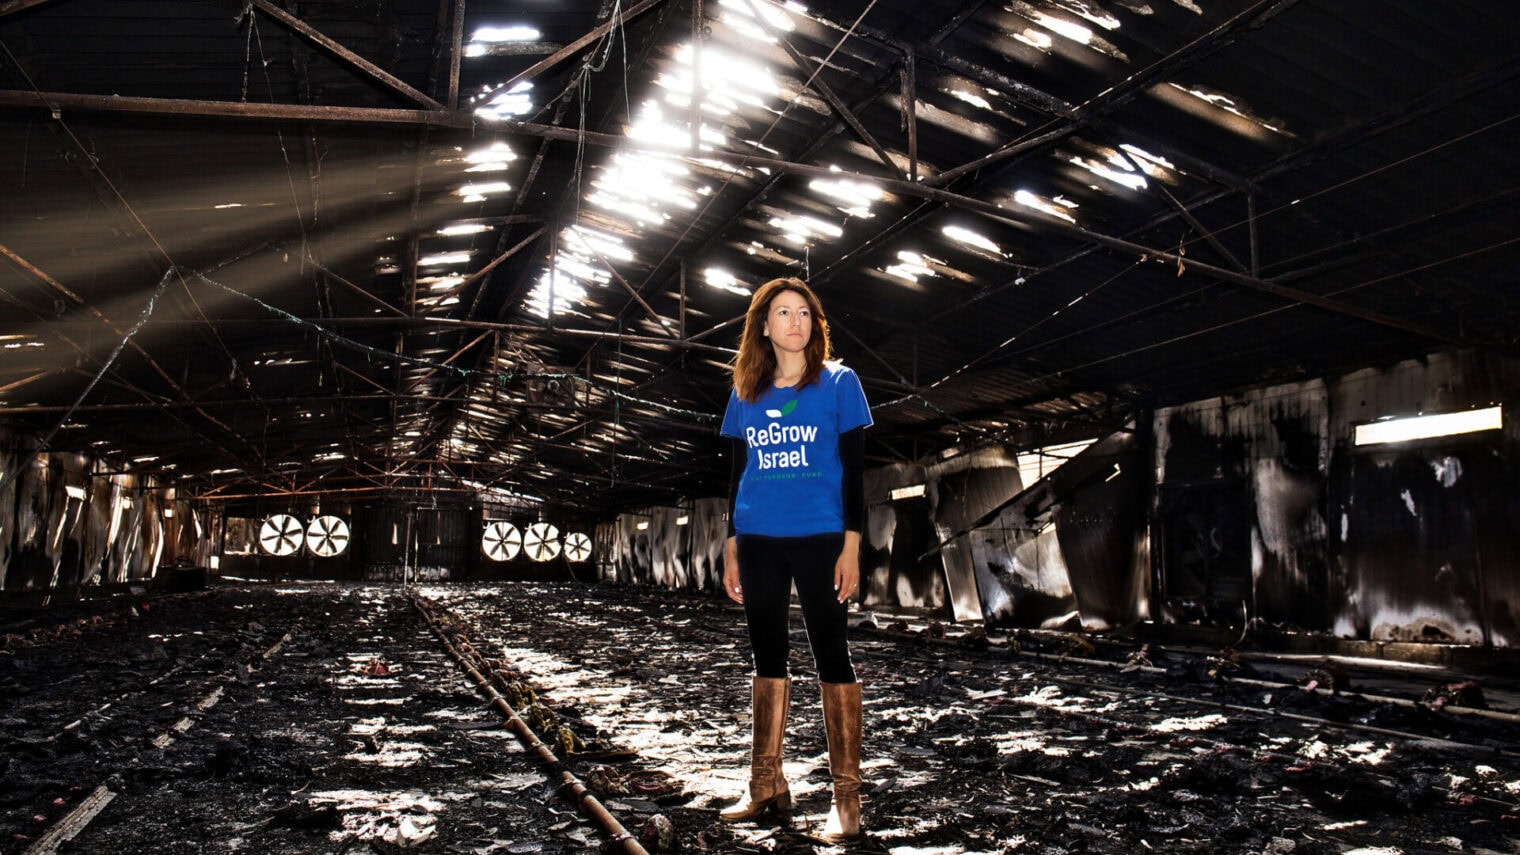 Danielle Abraham stands in an agricultural shed destroyed by Hamas terrorists on October 7, in Nir Oz. Photo by Noam Chen